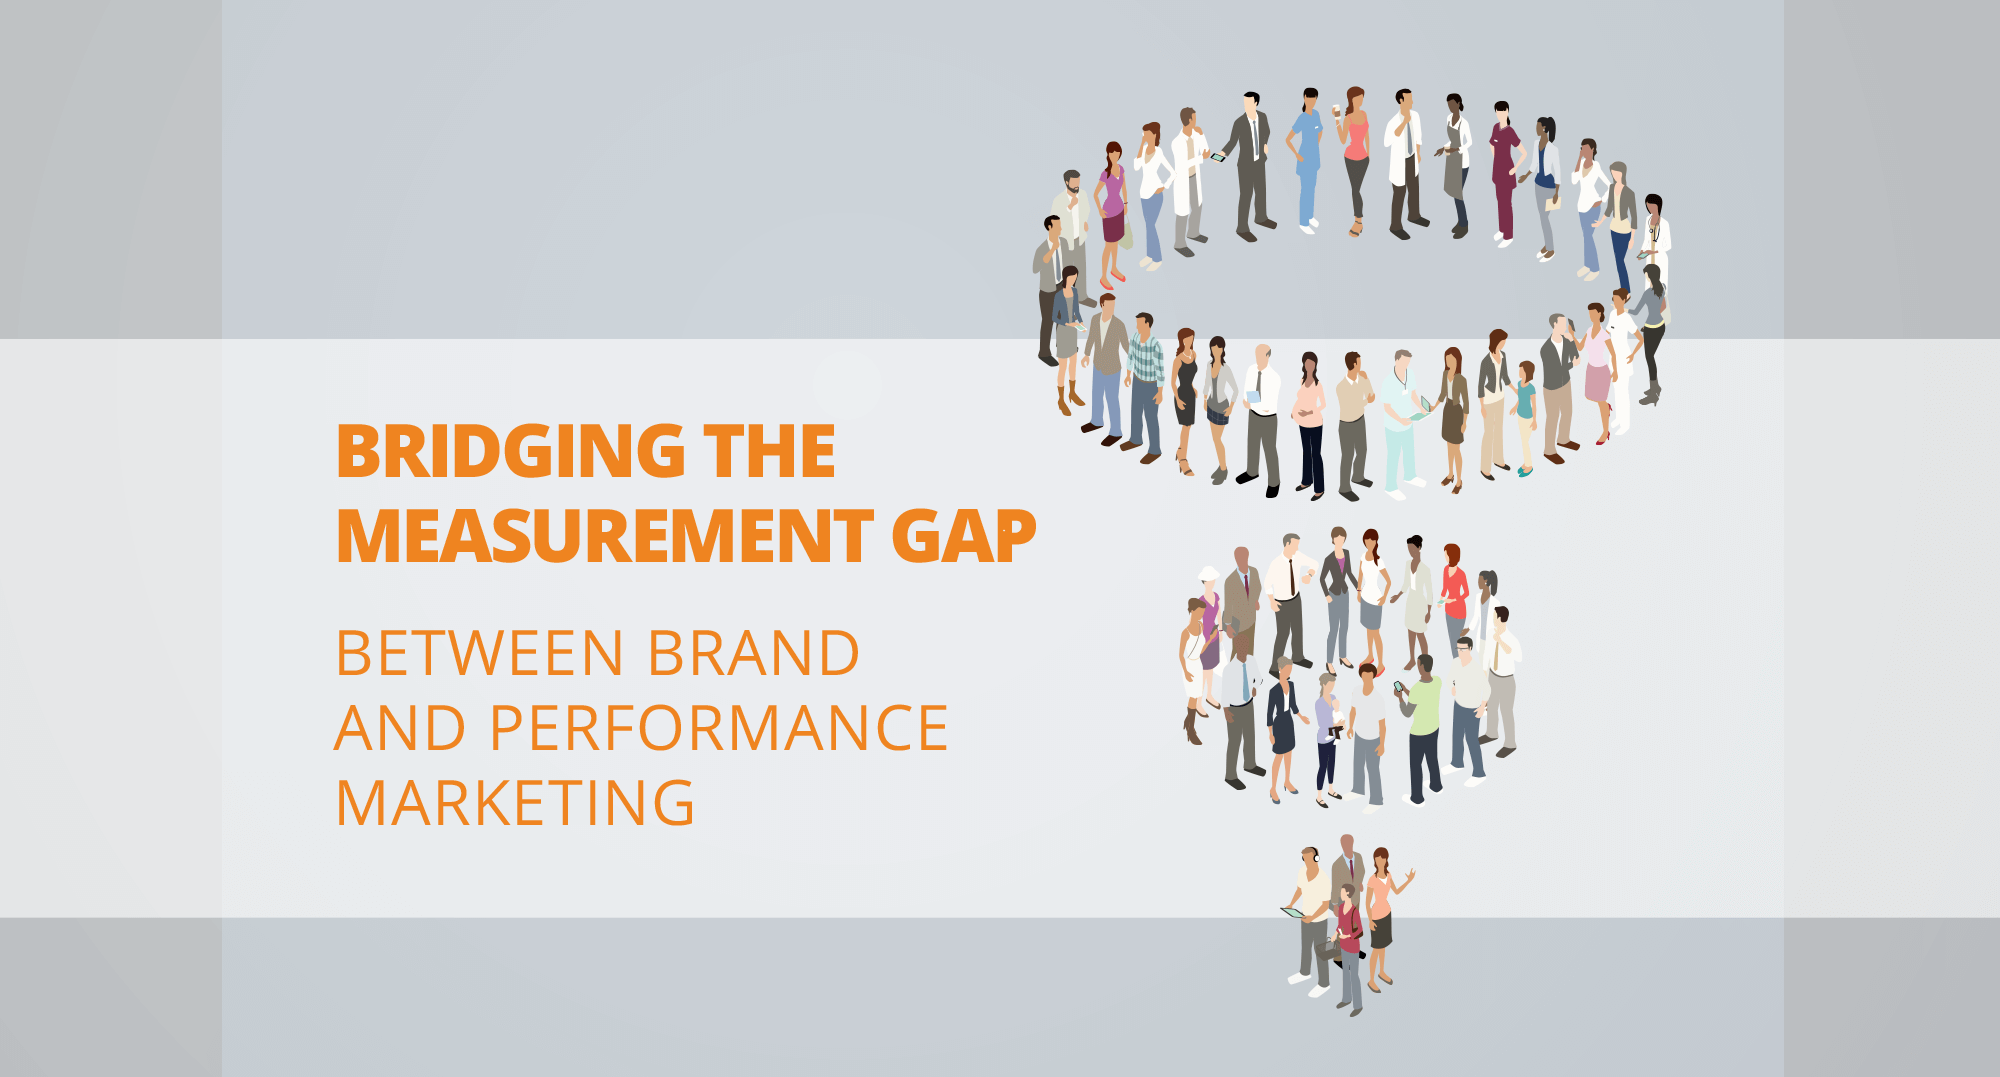 Bridging the measurement gap between brand and performance marketers